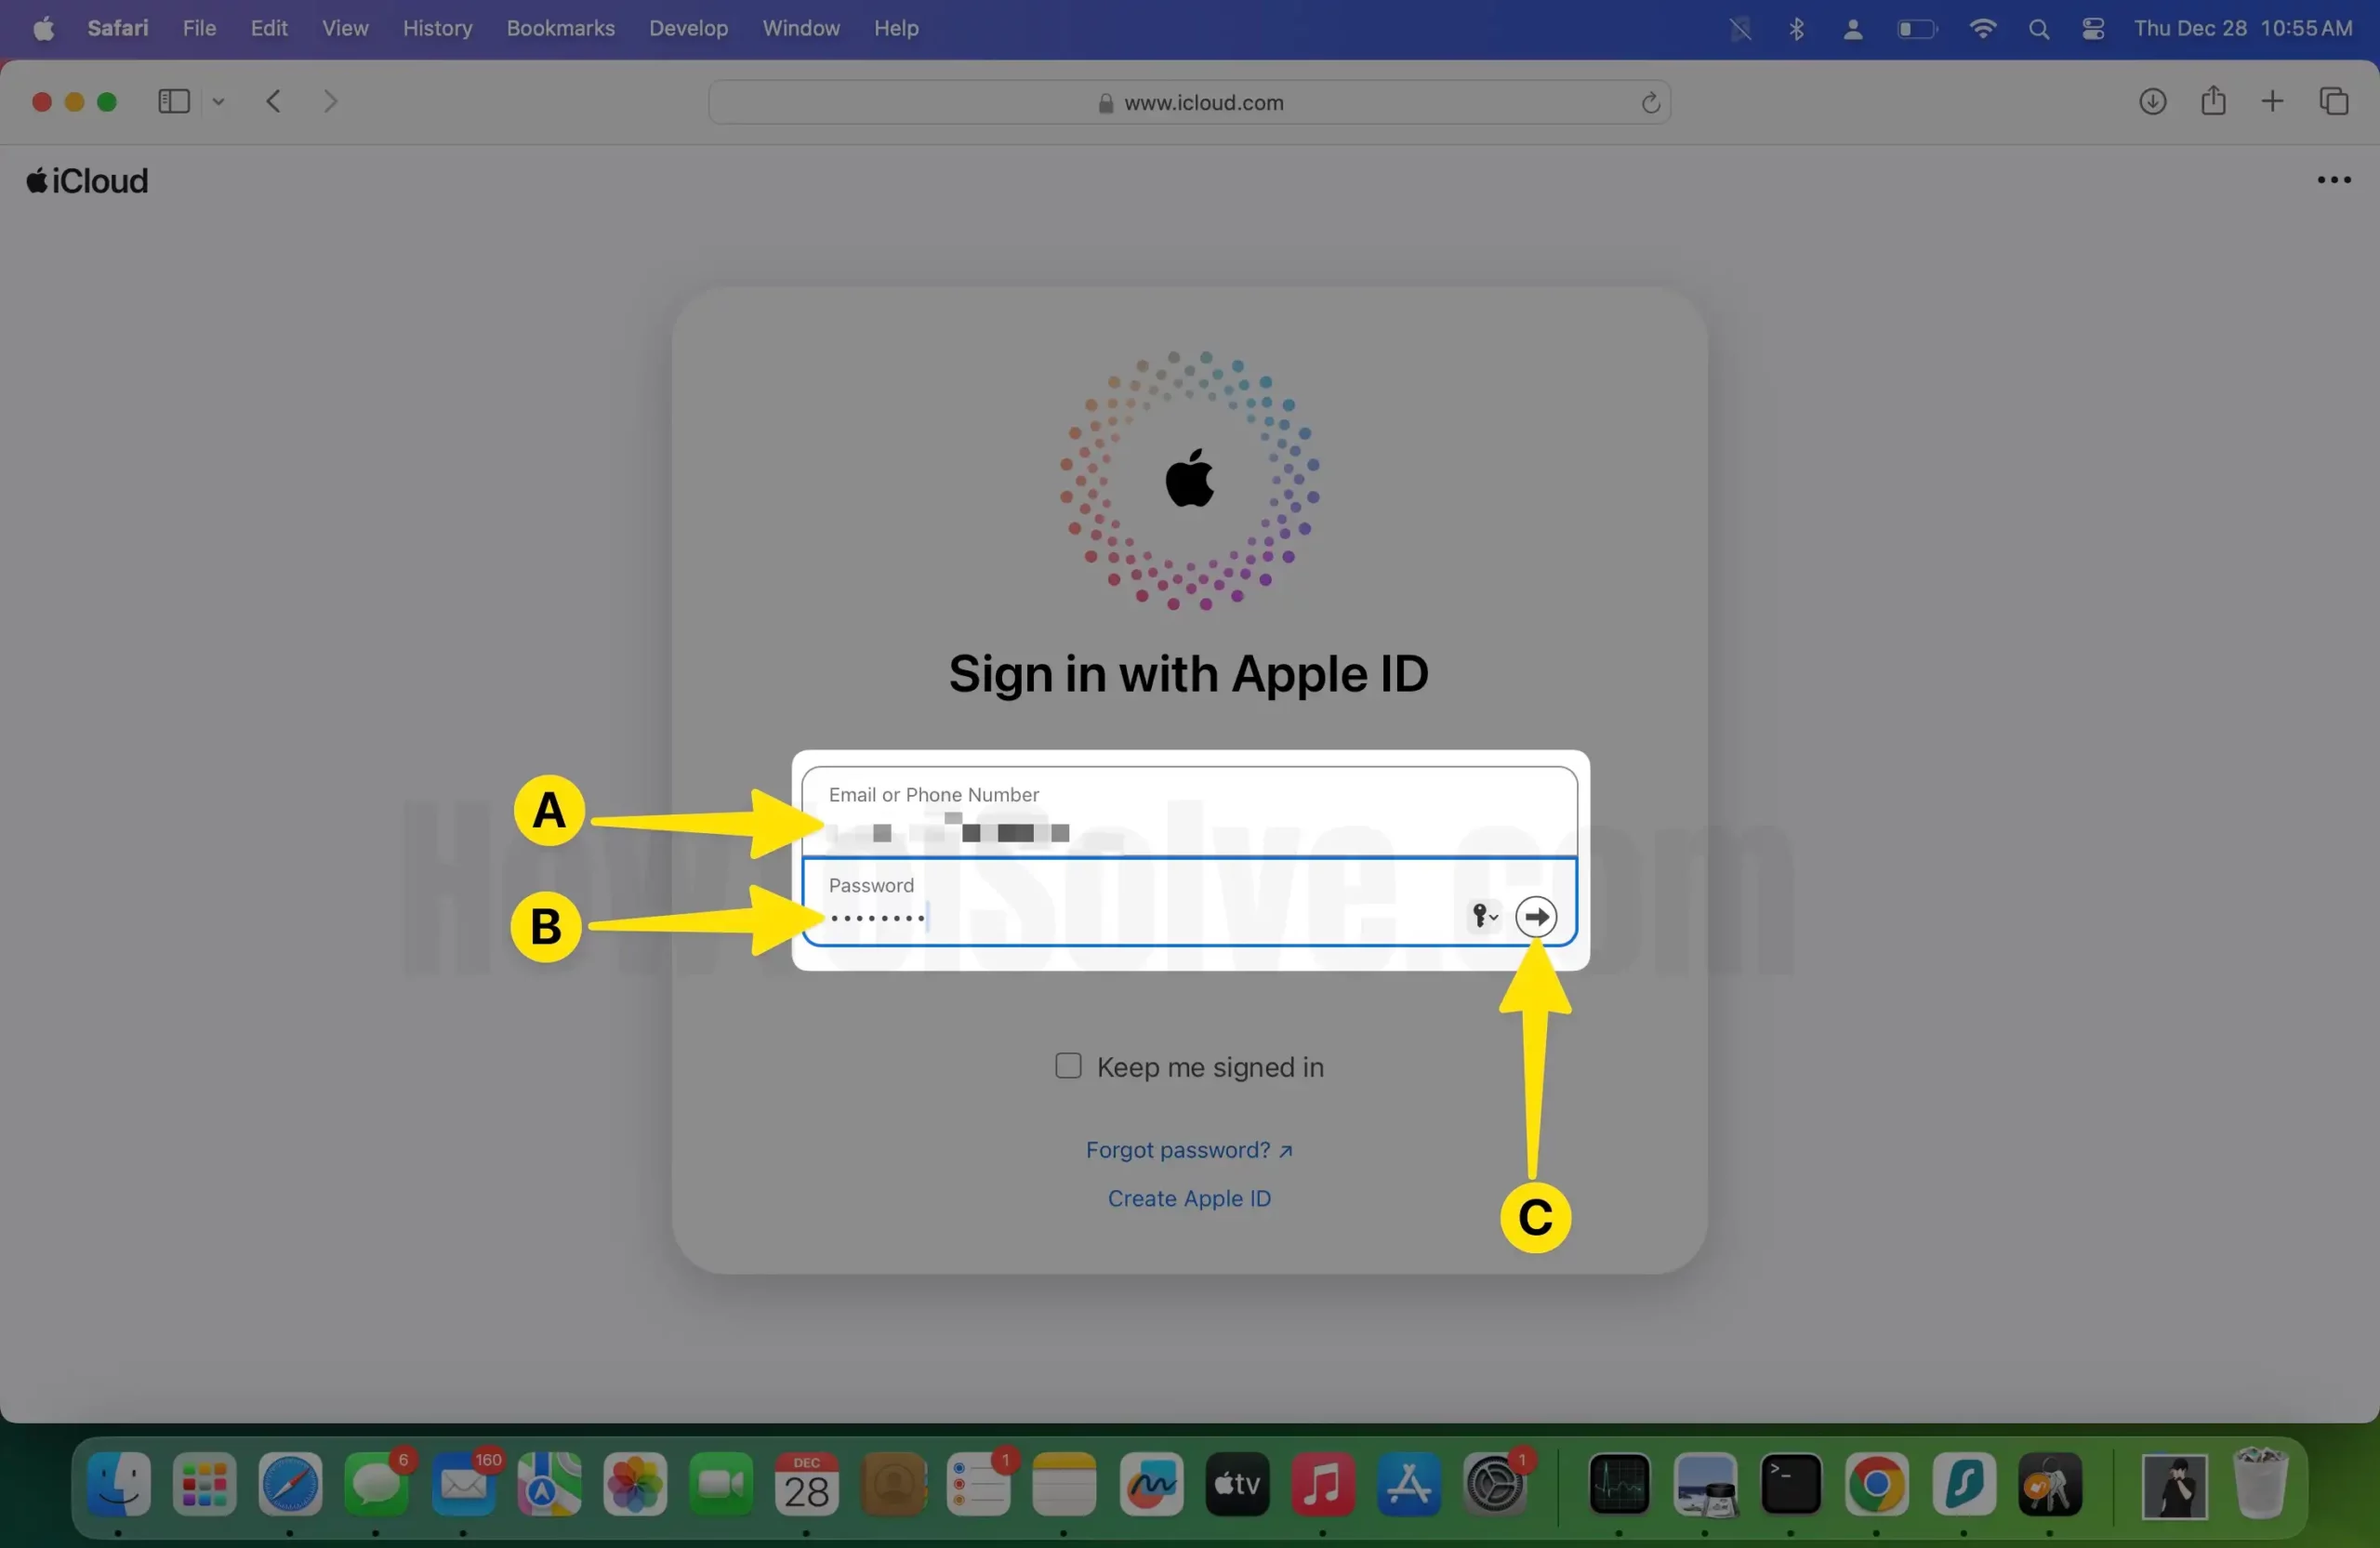 Log in with your Apple ID password that's signed with your iPhone on Mac